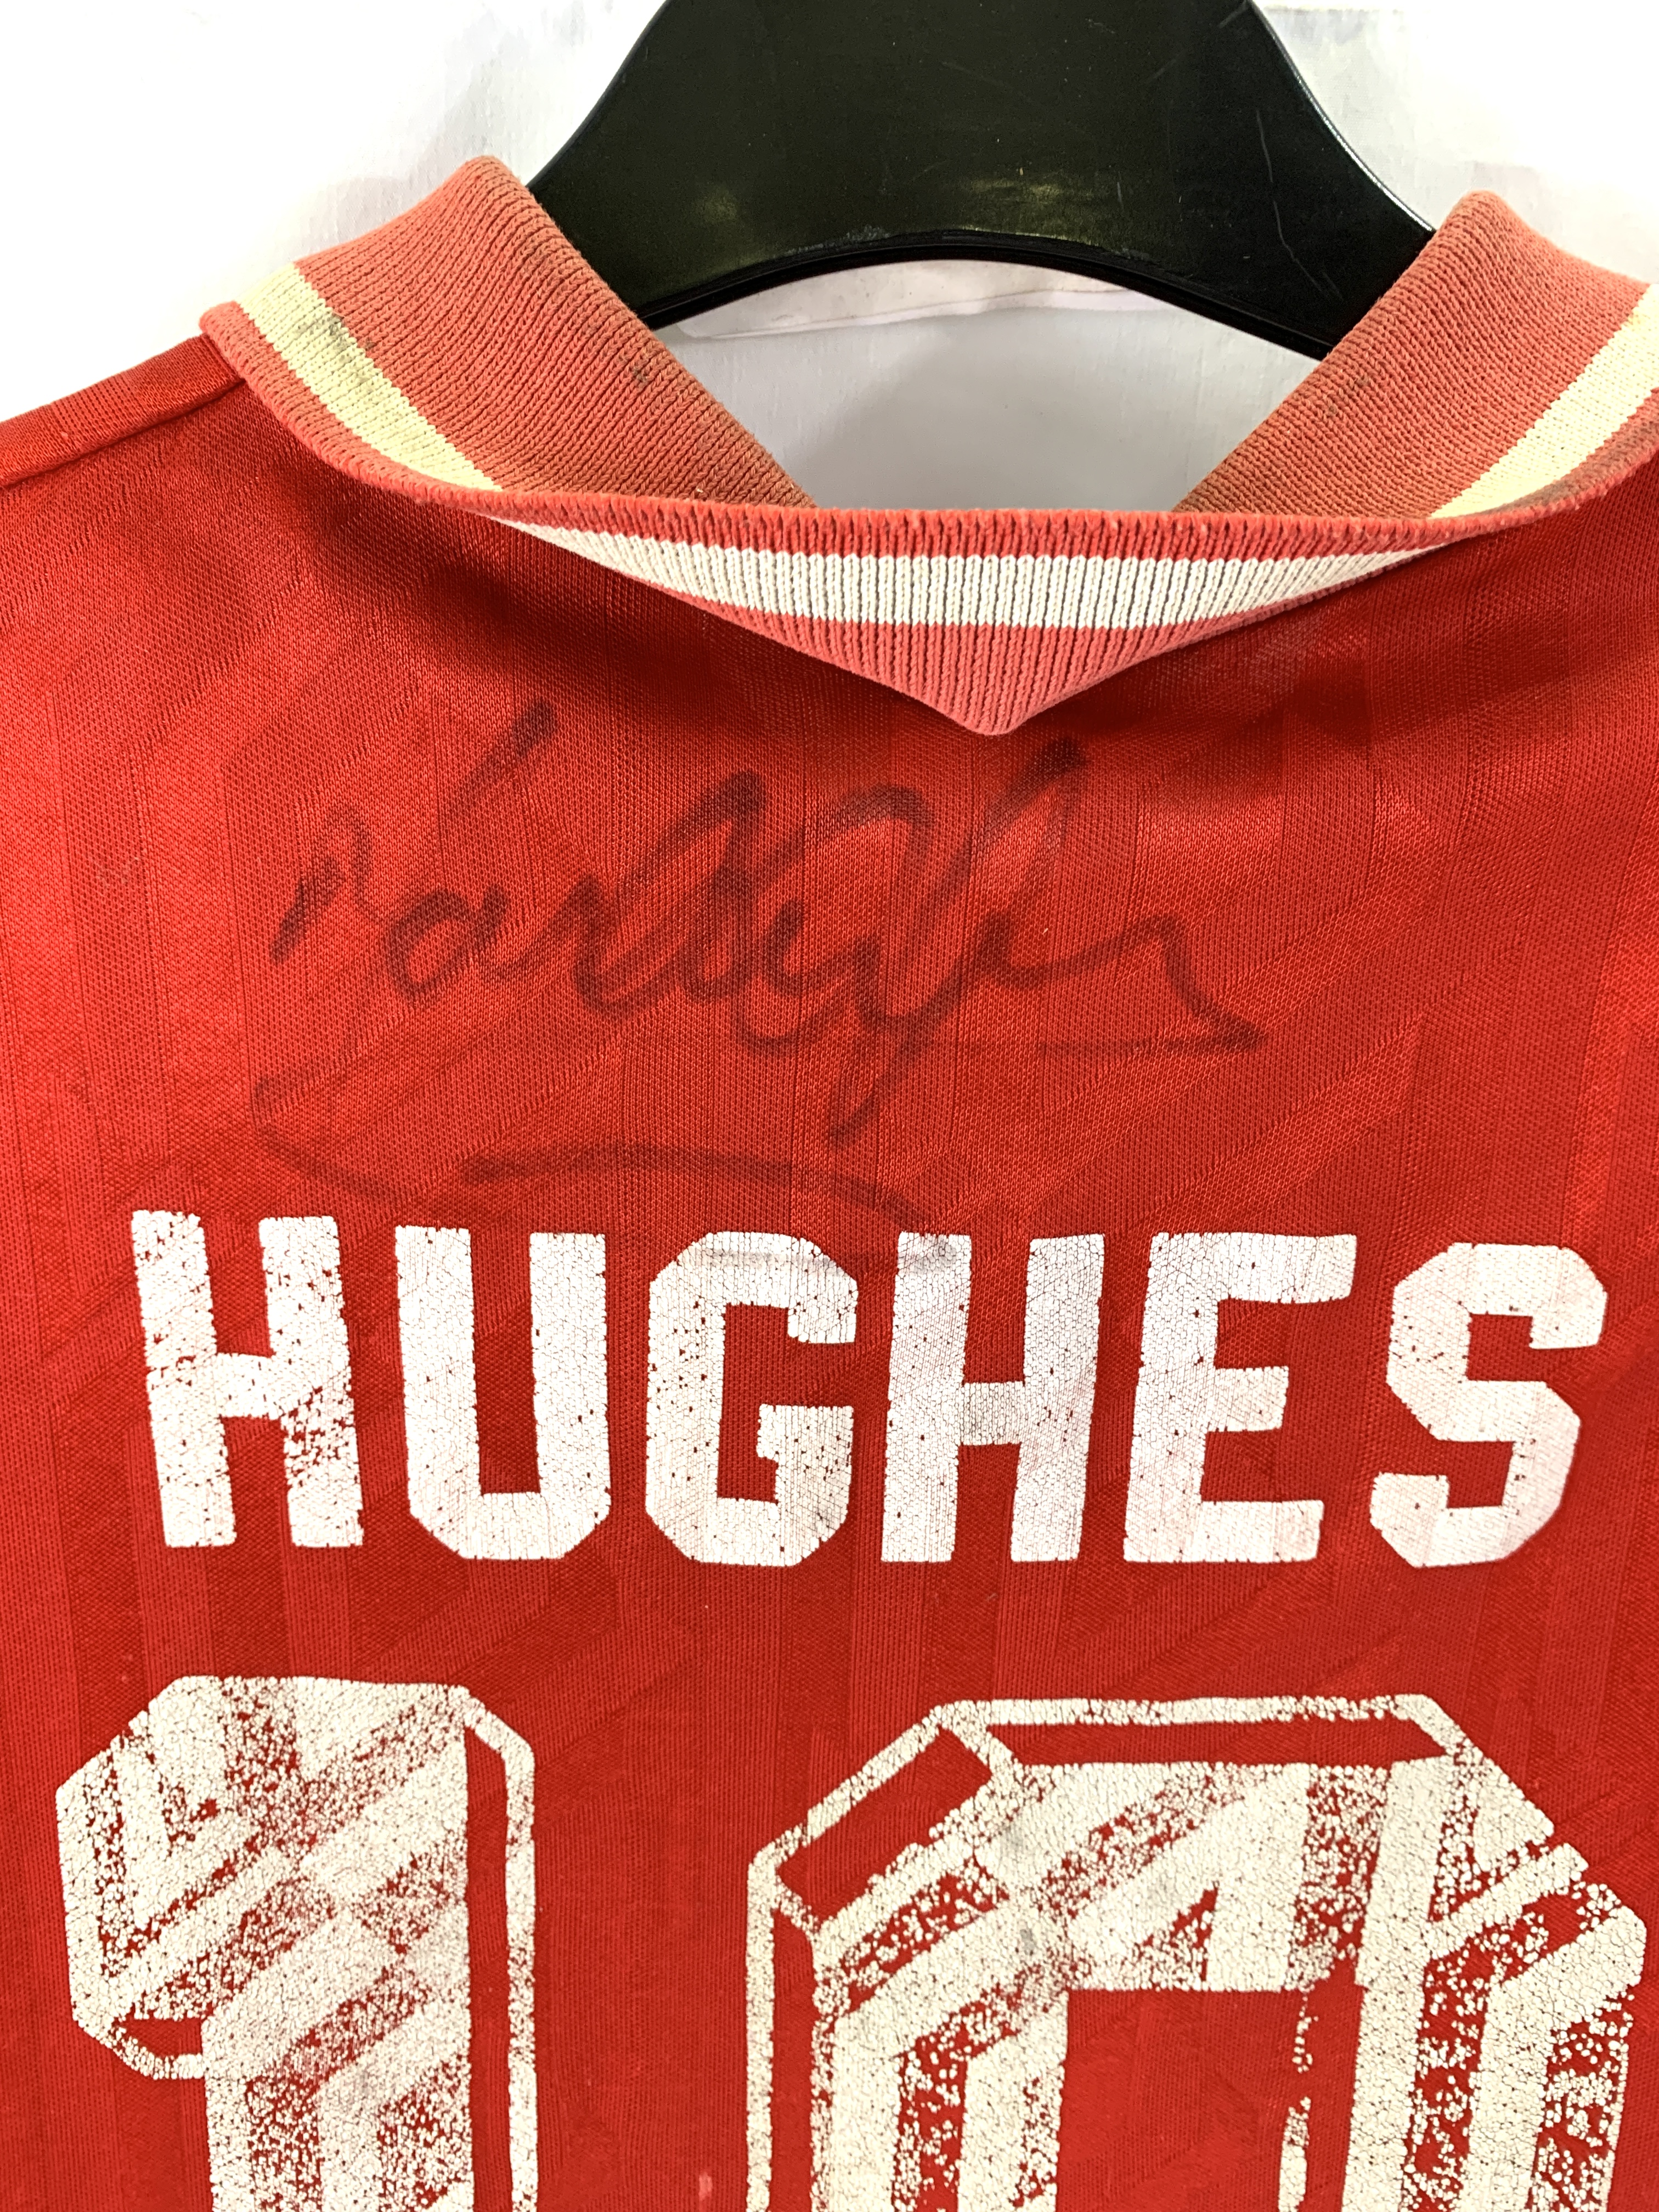 A signed Wales football shirt - Image 4 of 4